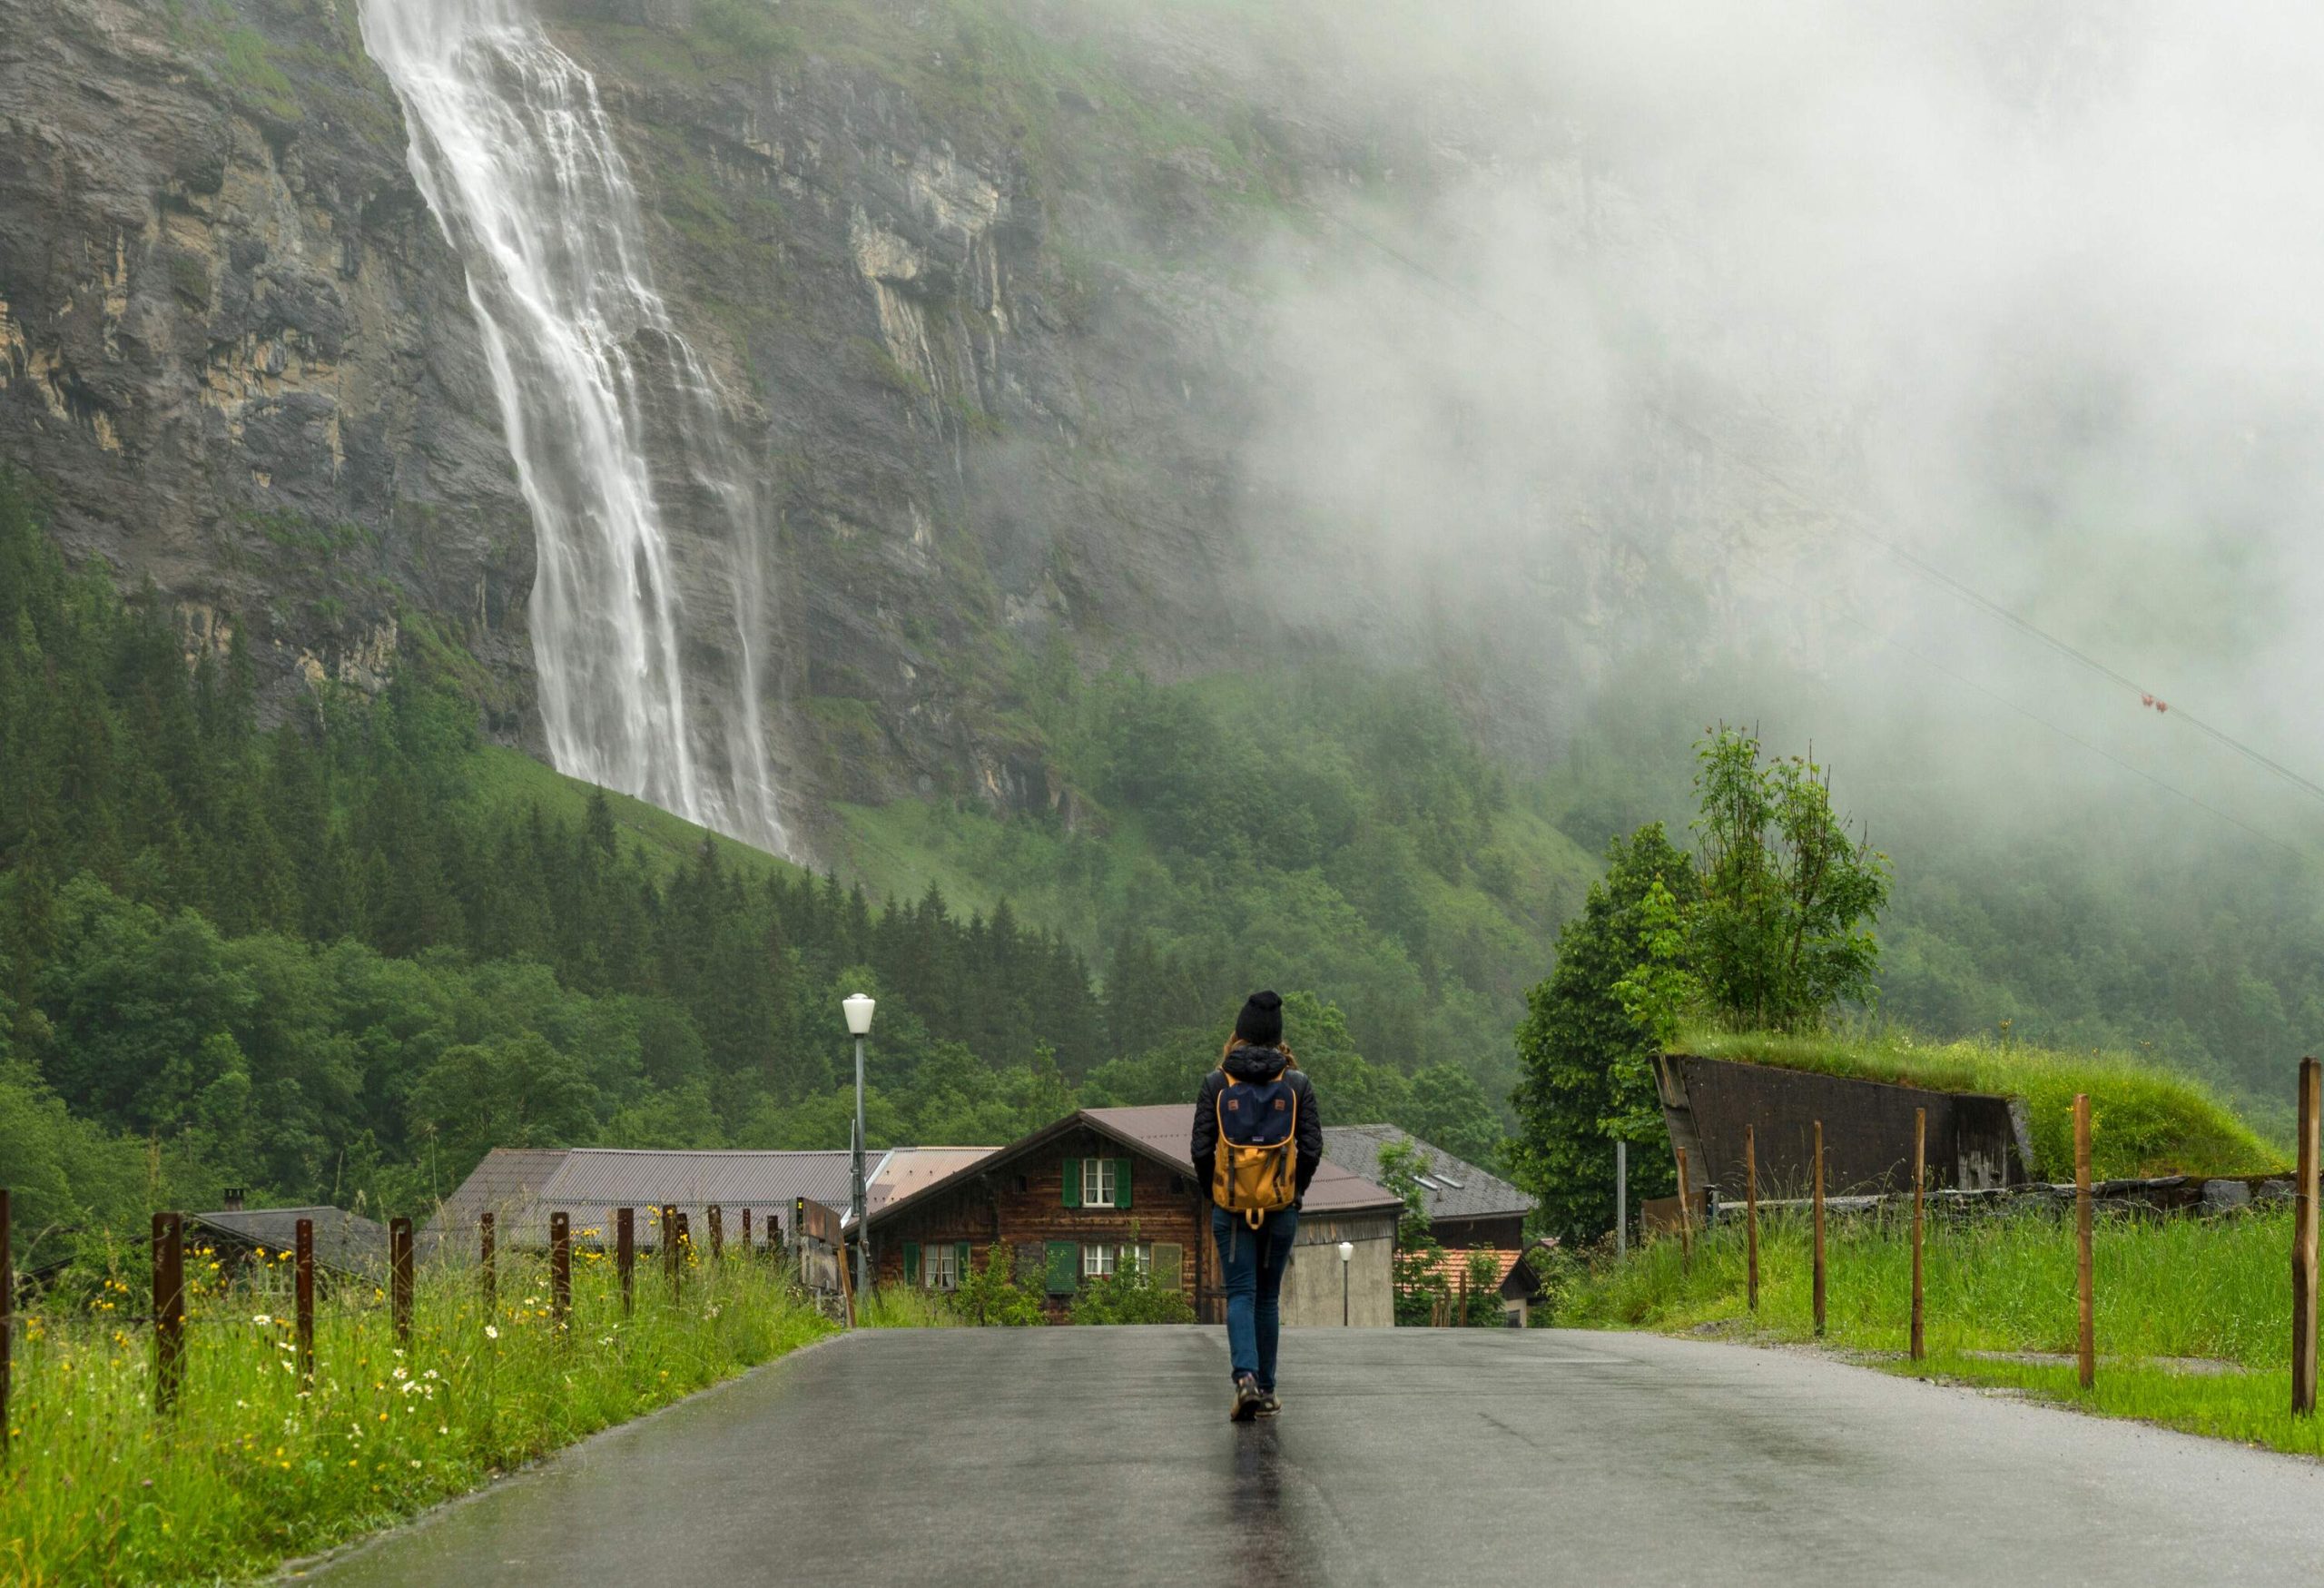 A person walking on a wet road toward the houses along a misty valley with waterfall gushing down a steep rock face in the distance.